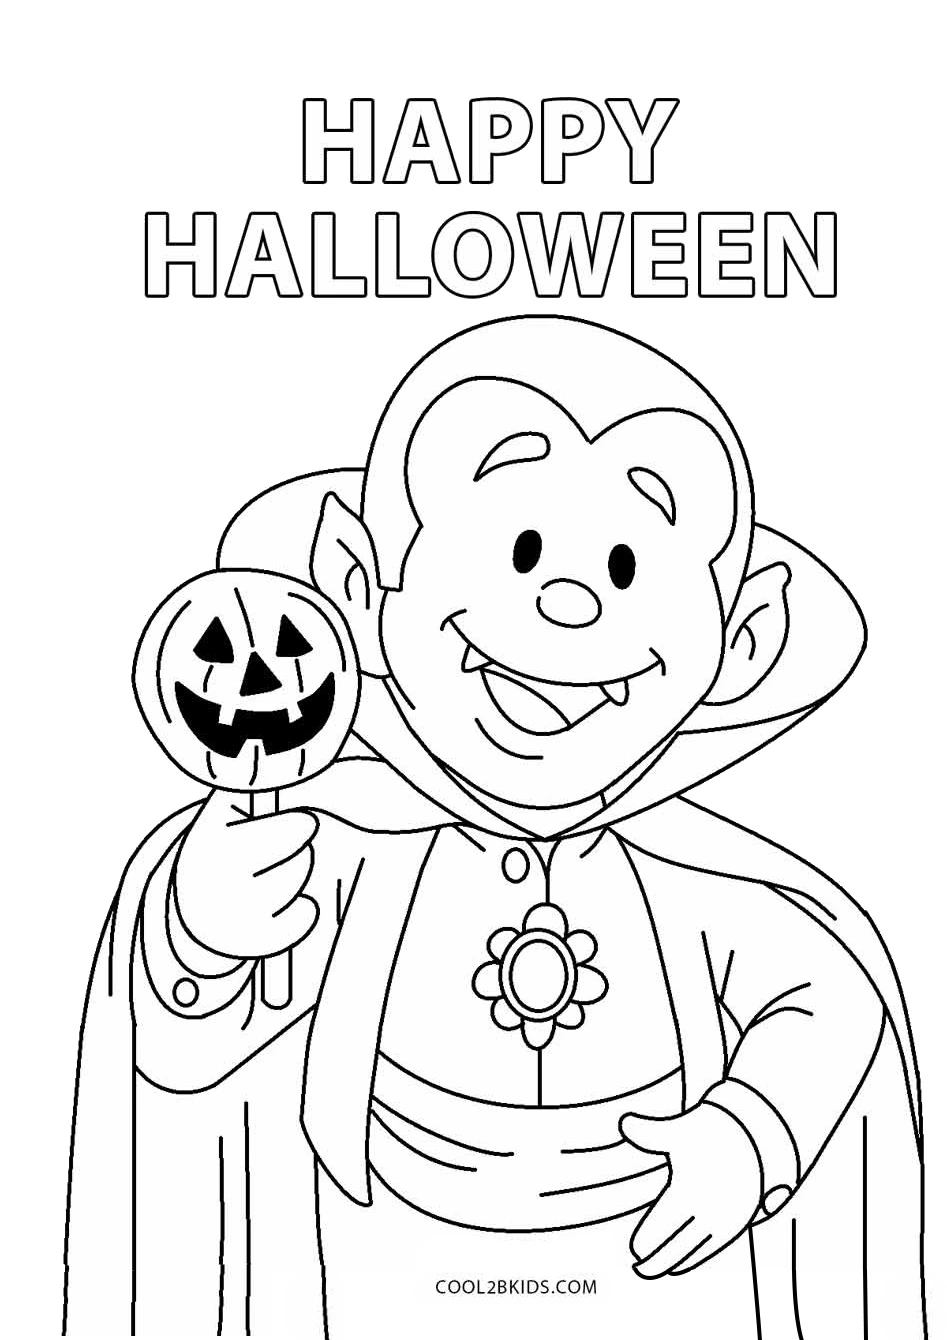 Free Printable Fairy Tales & Mythology Coloring Pages for Kids - Cool2bKids